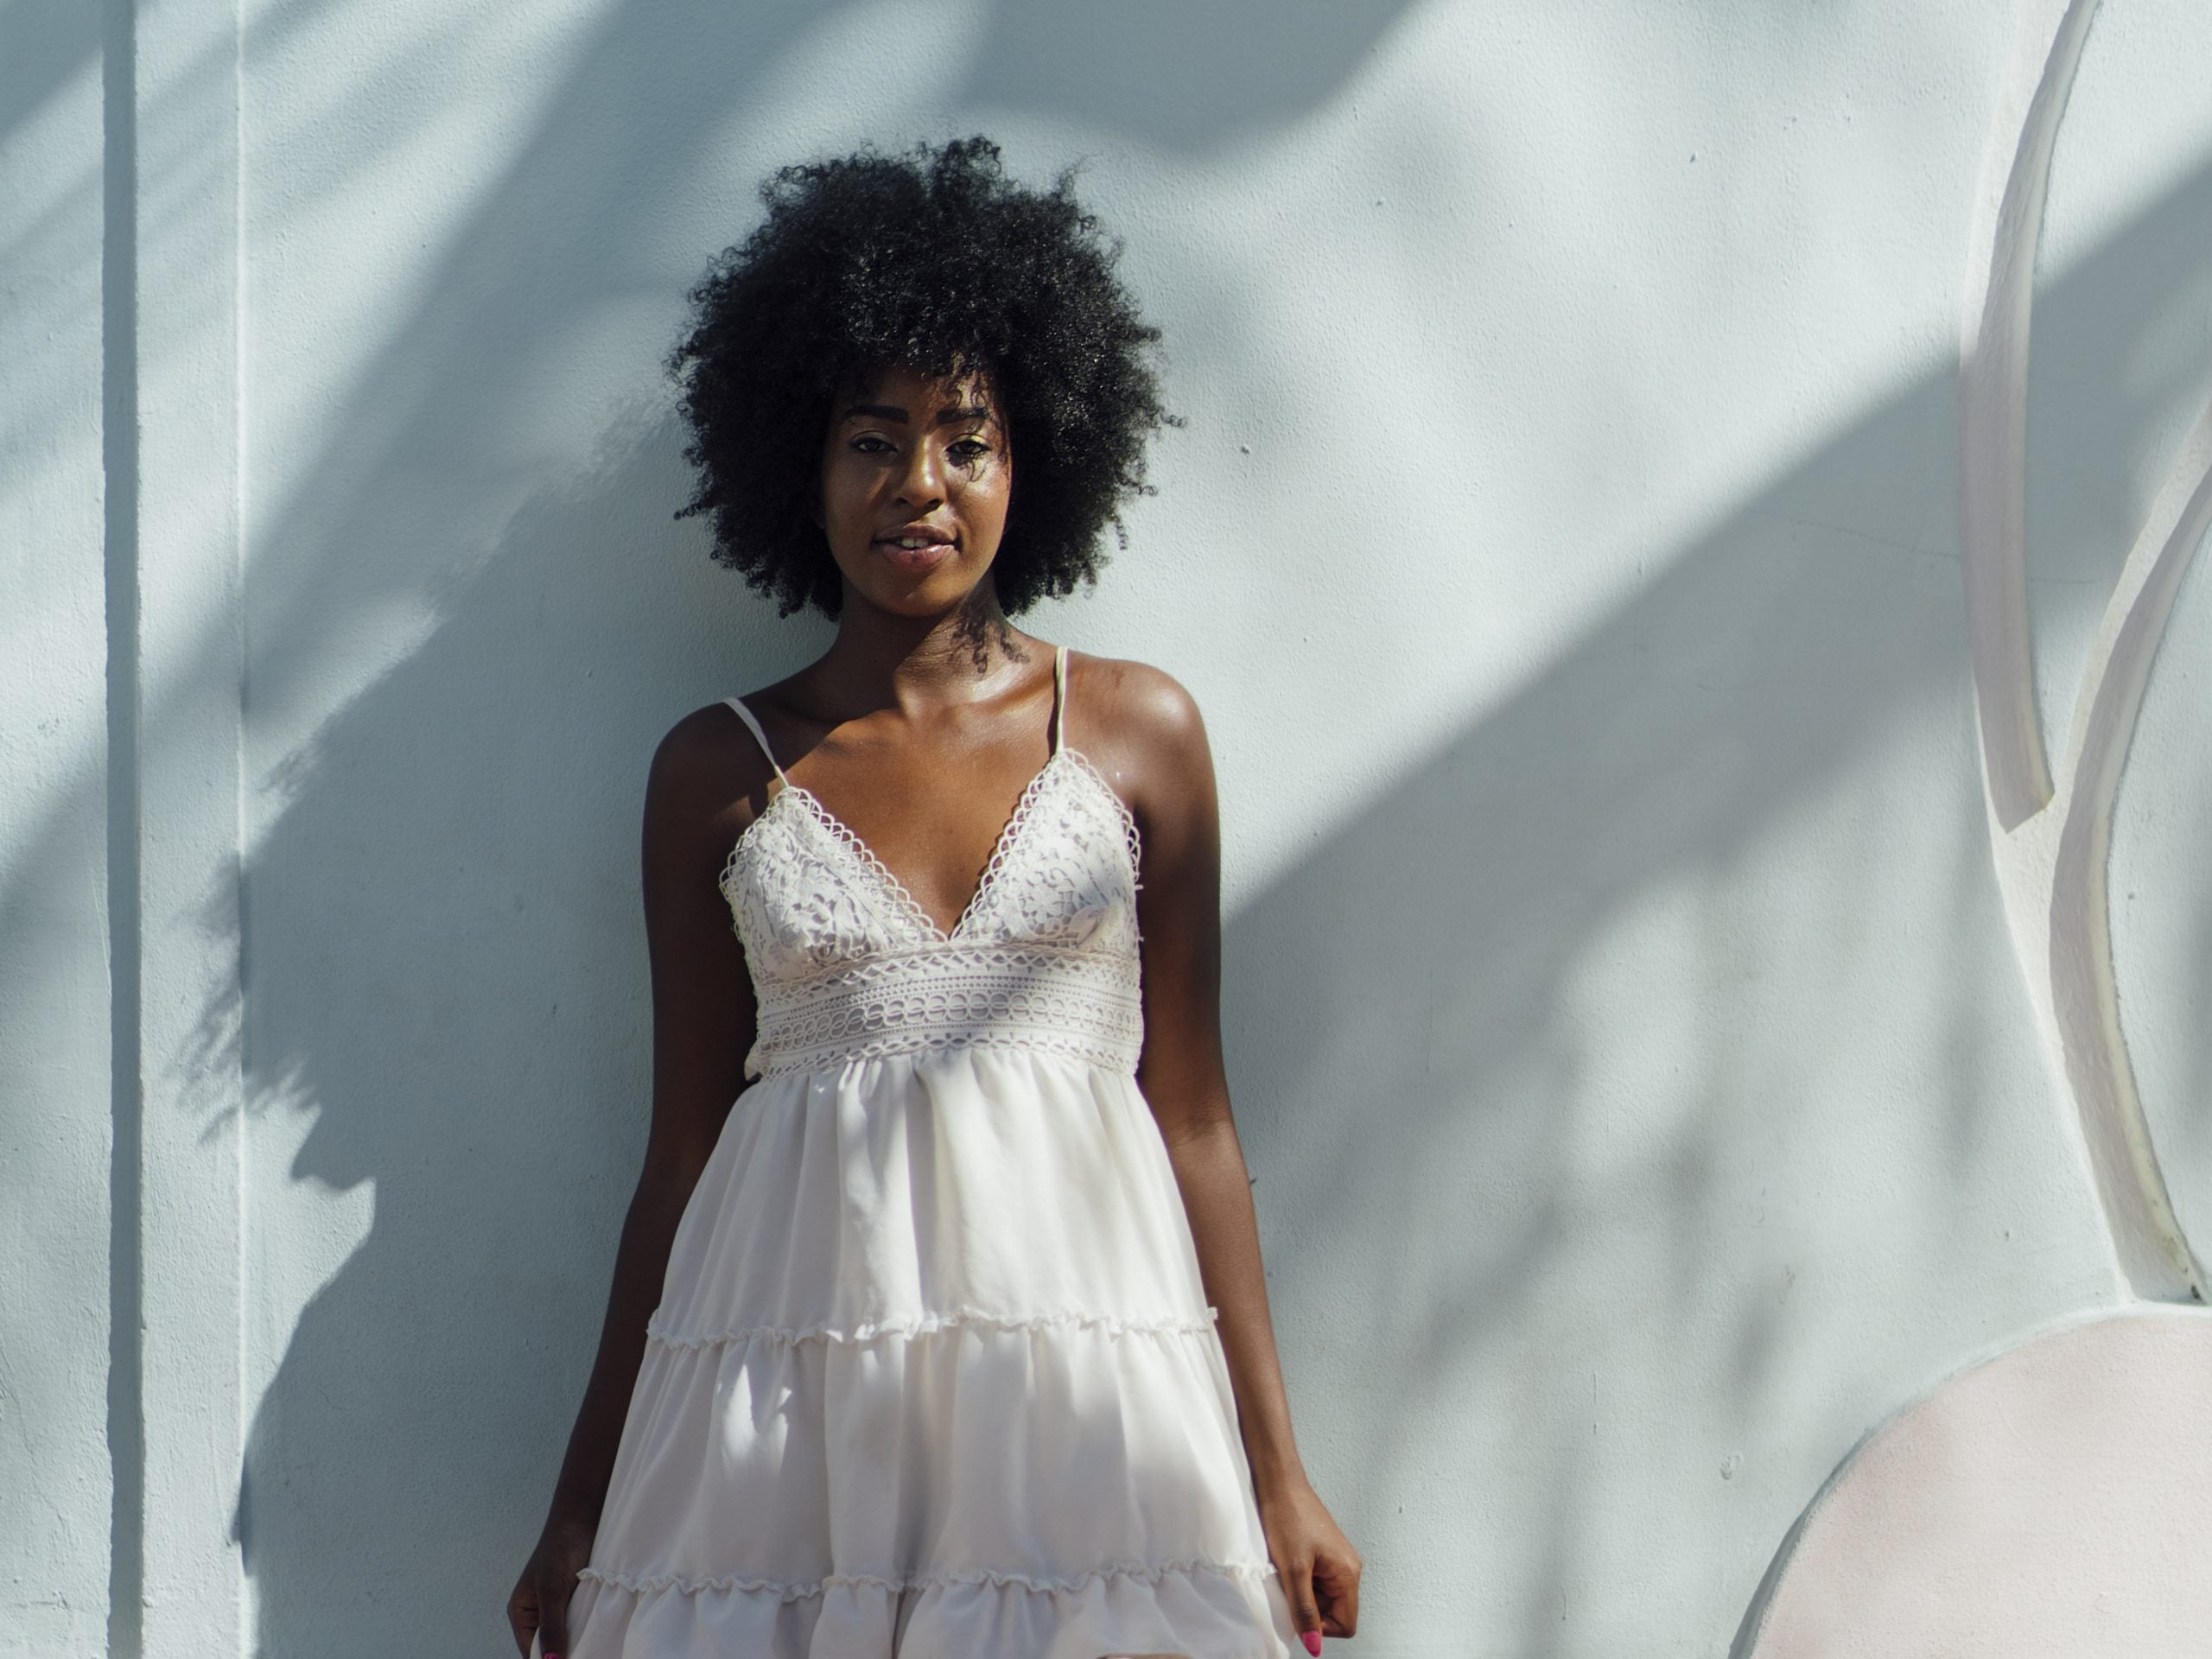 The Best White Summer Dresses To Add To Your Wardrobe